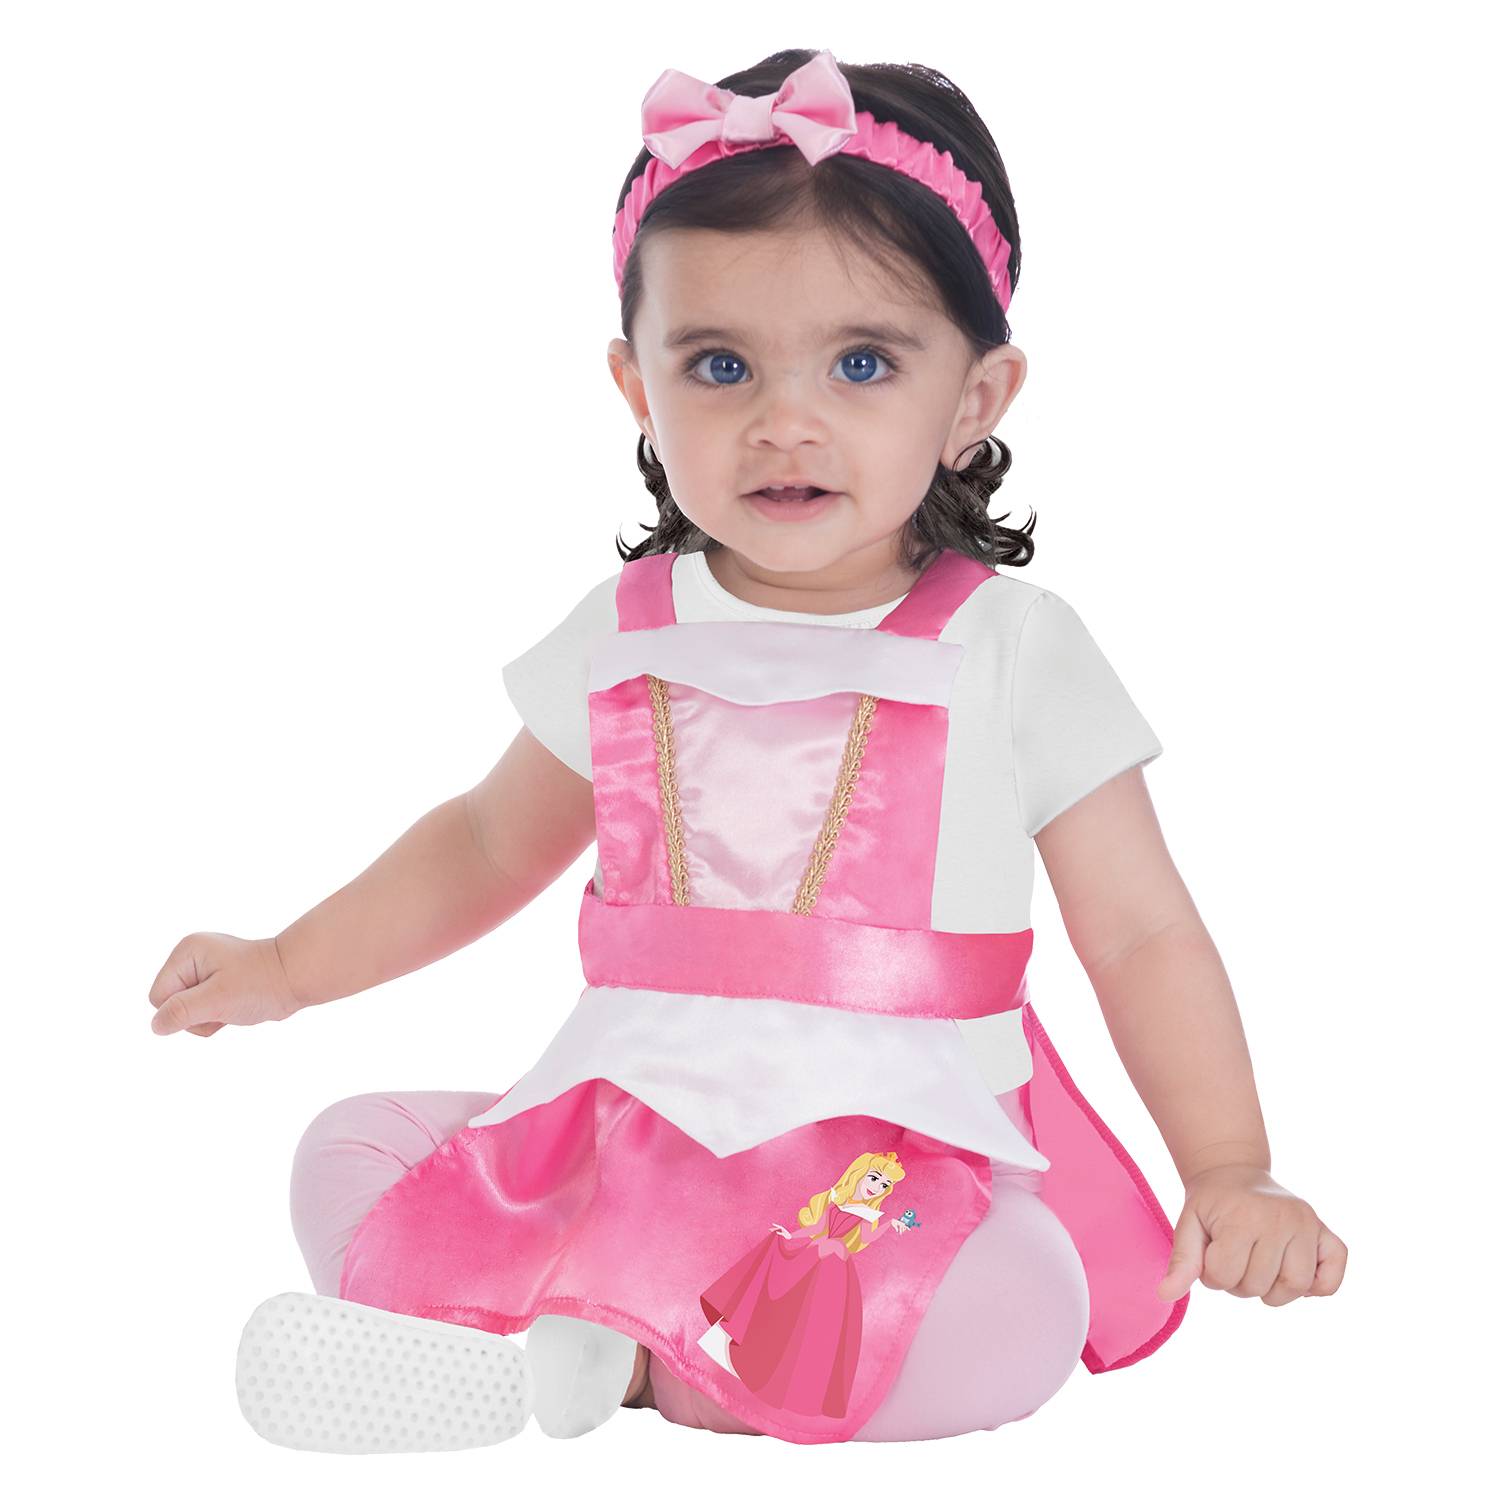 Disney Baby Sleeping Beauty Dress Up Pinafore 1-2Years (80-92cm) RRP £14.99 CLEARANCE XL £2